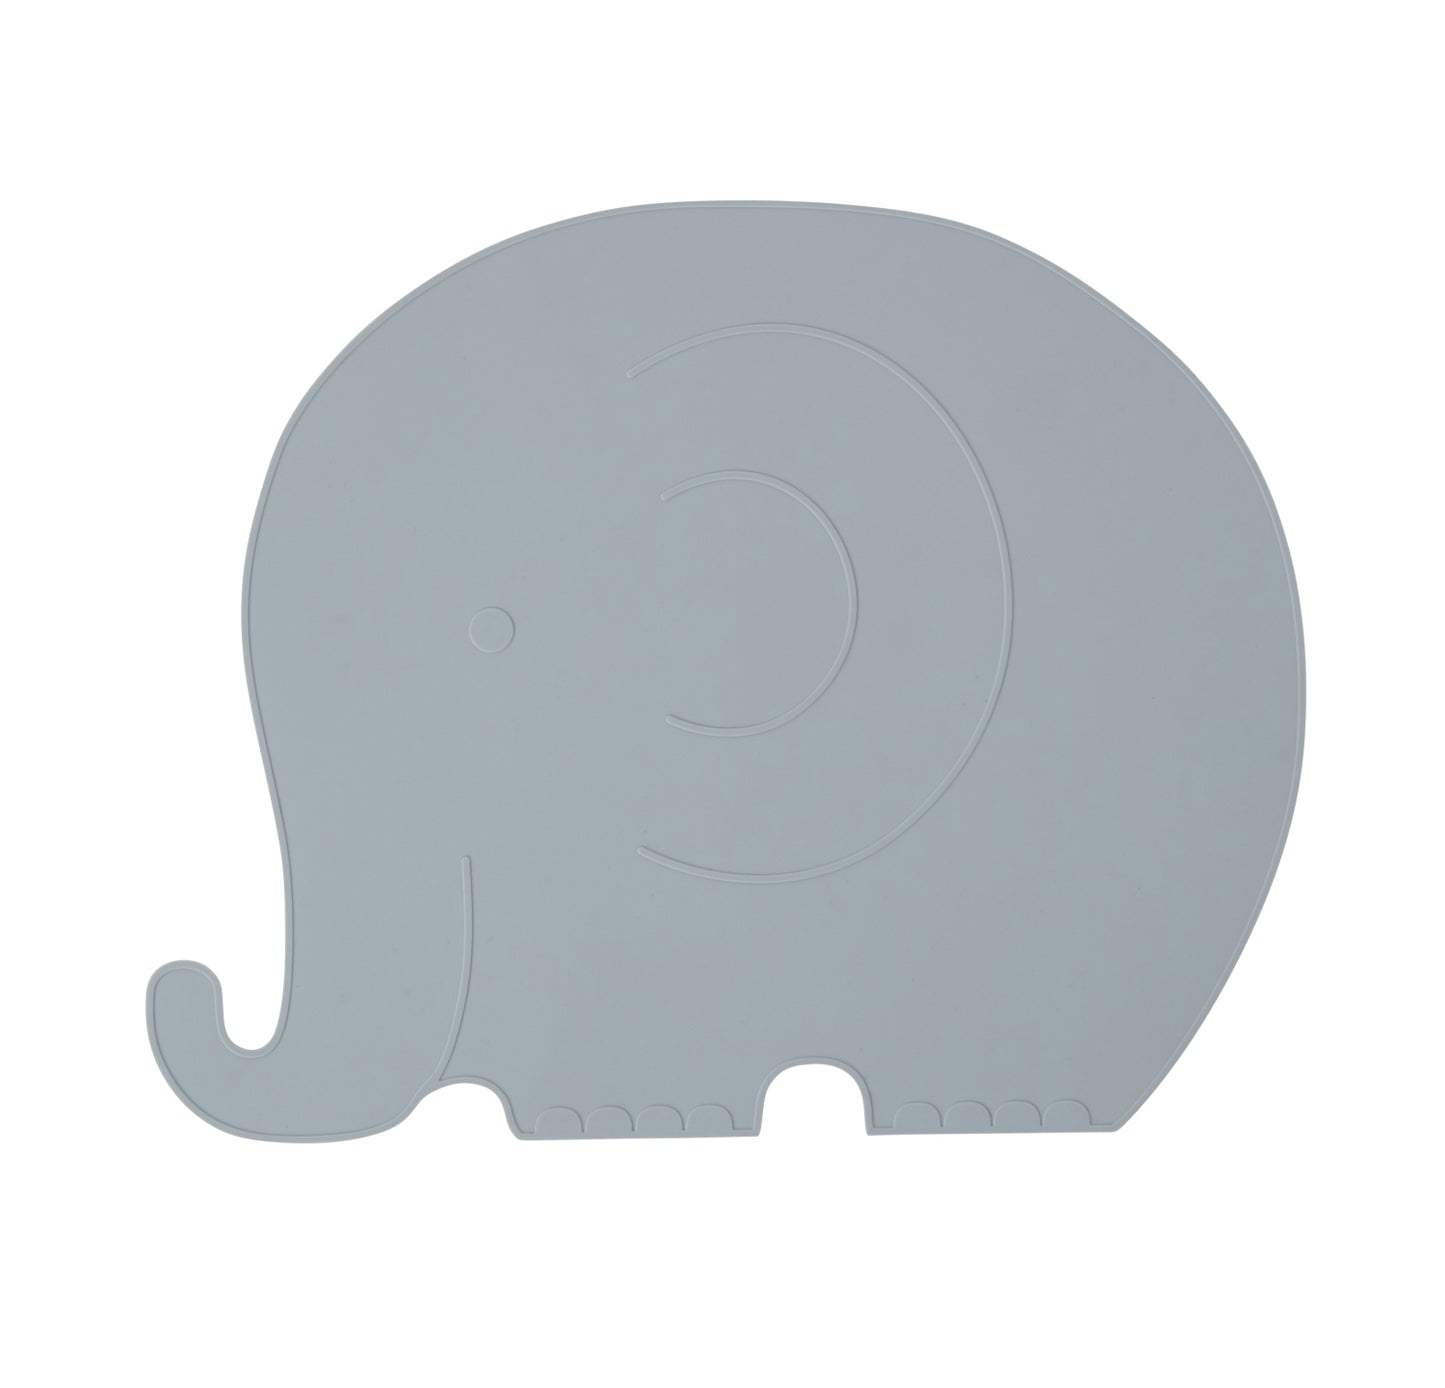 OYOY Placemat Henry Elephant Pale Blue